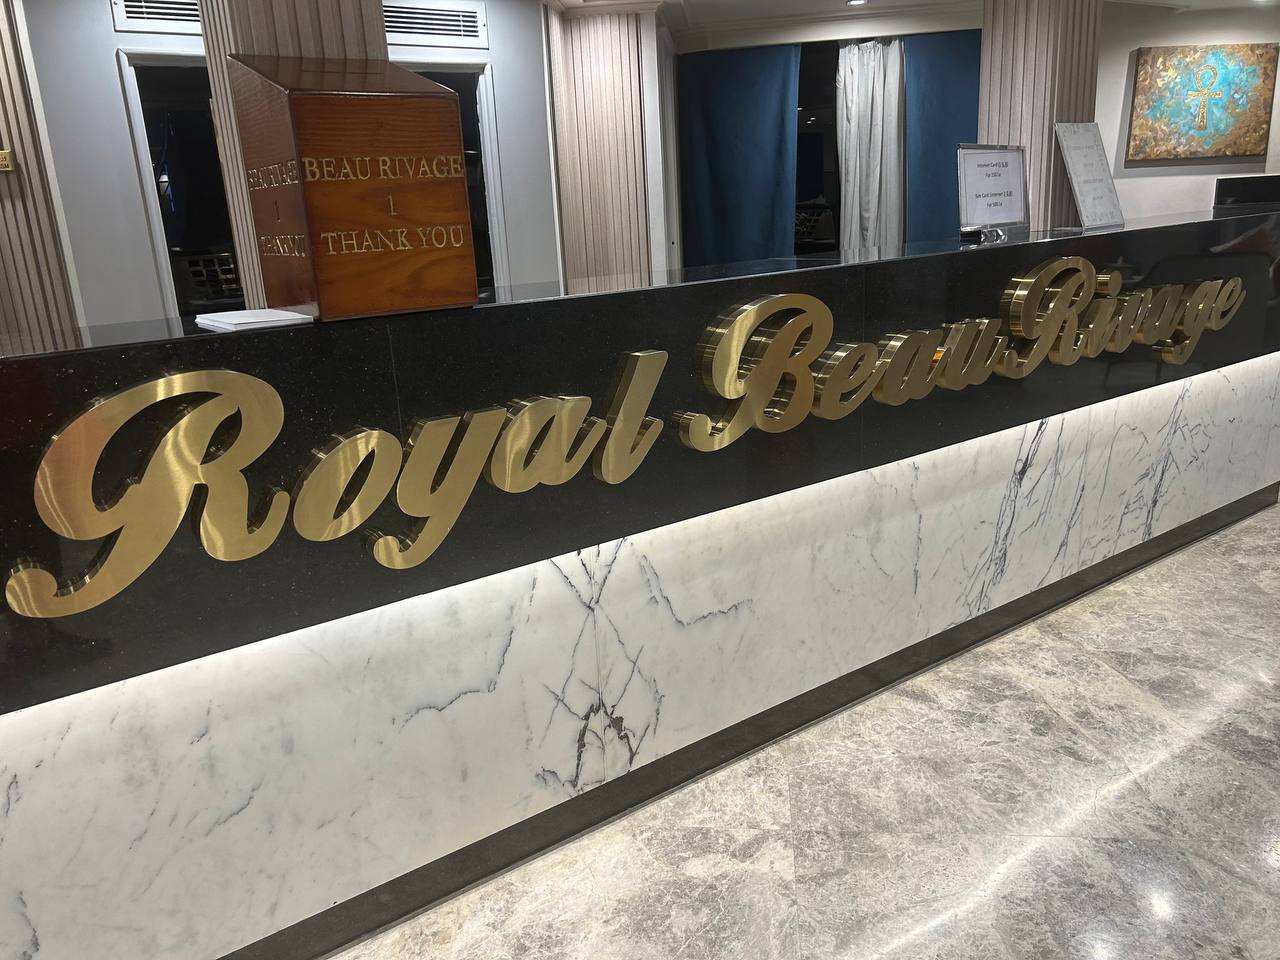 Eating on the Royal Beau Rivage